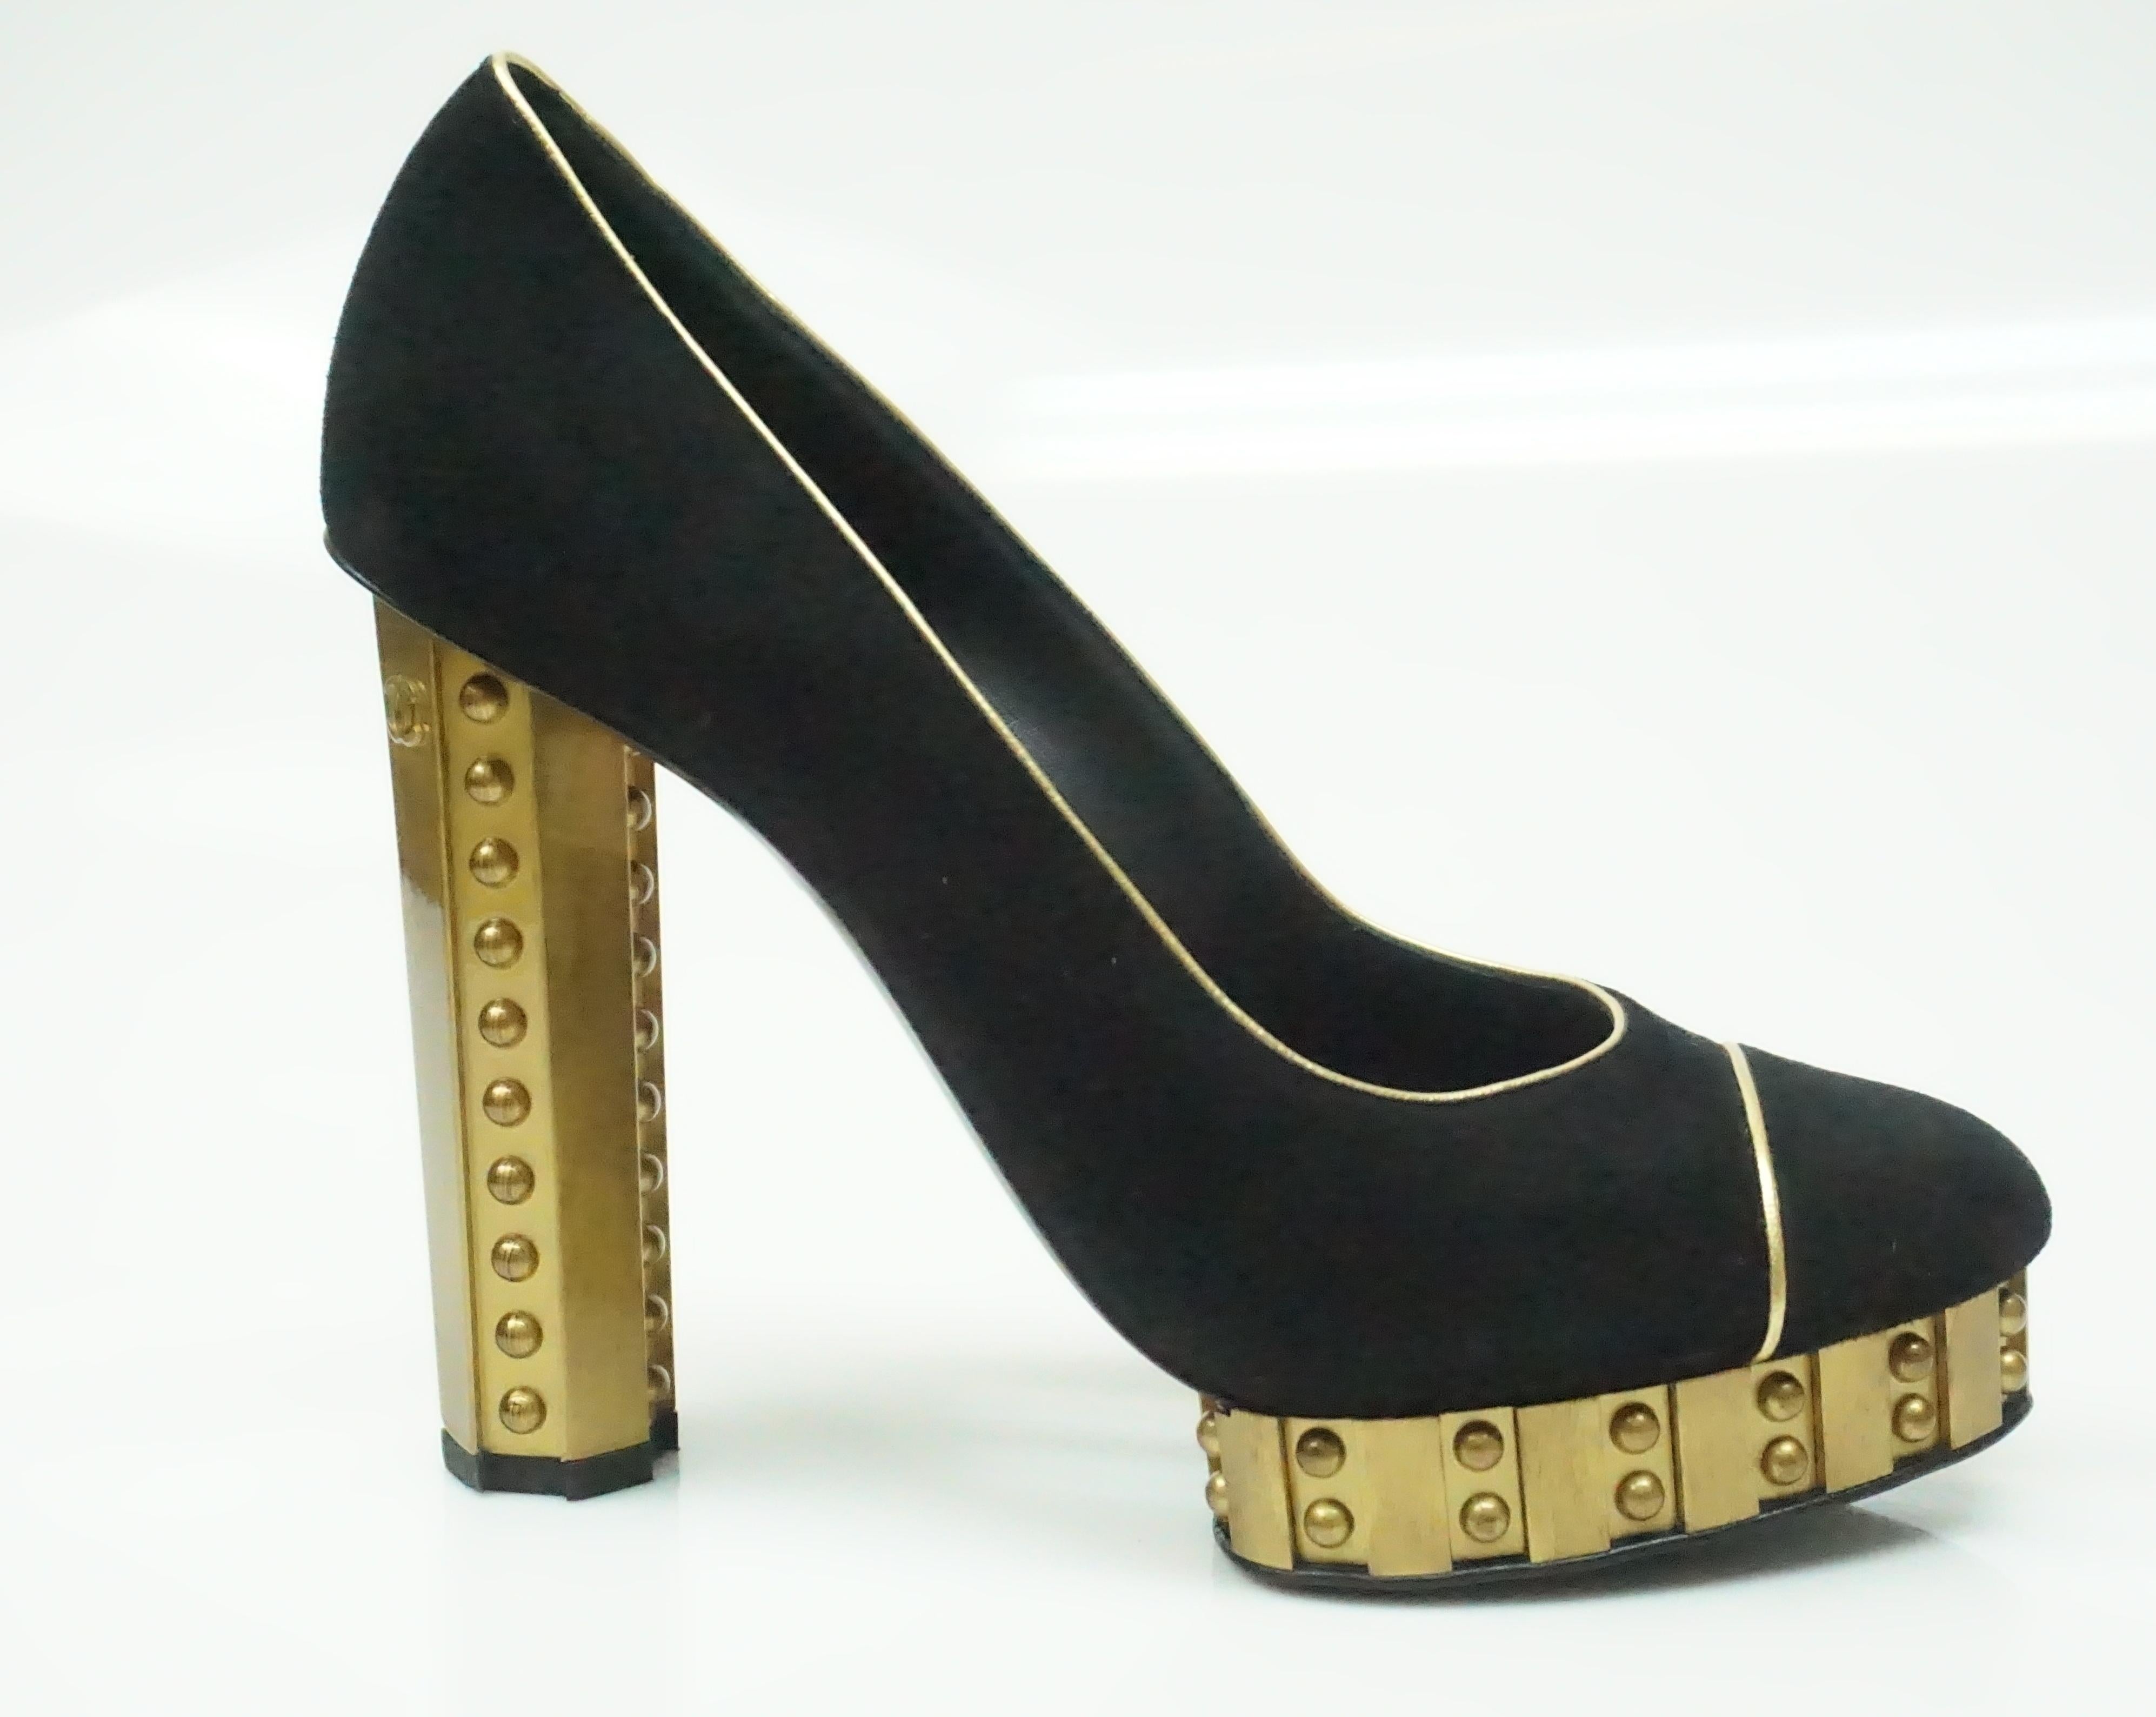 CHANEL Black Suede Pump with Gold Hammered Heel - 38. These amazing shoes are in excellent condition, with barely any sign of use. They are black suede and the heel is composed of thick gold metal with tiny button appliques. The shoe sits on a